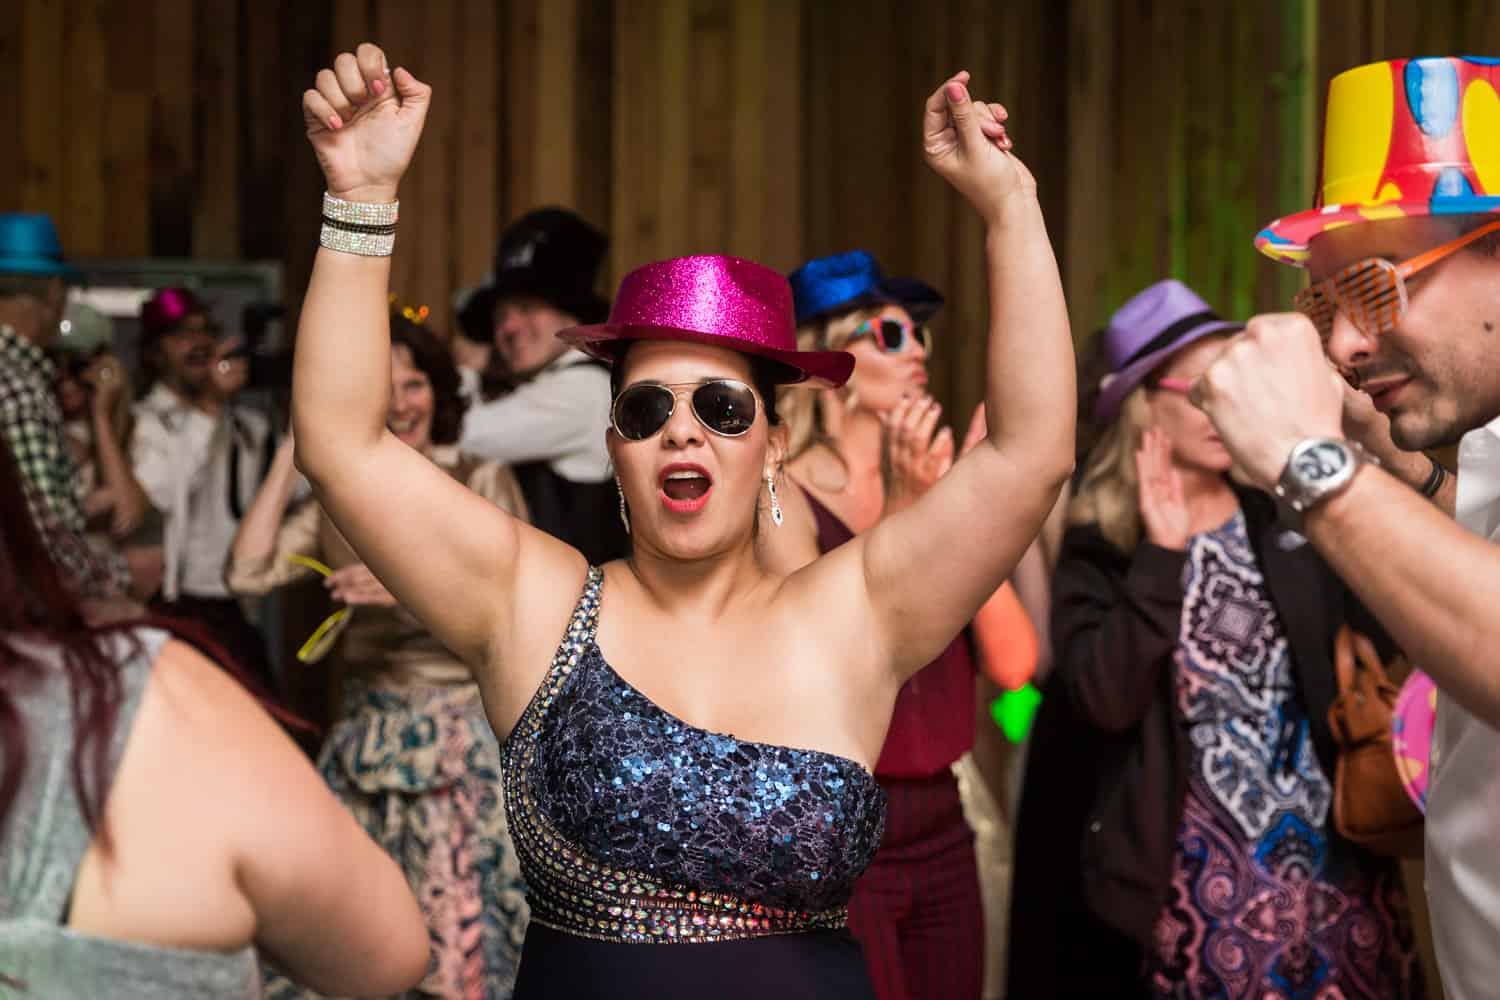 Woman wearing hat and sunglasses dancing with hands in air